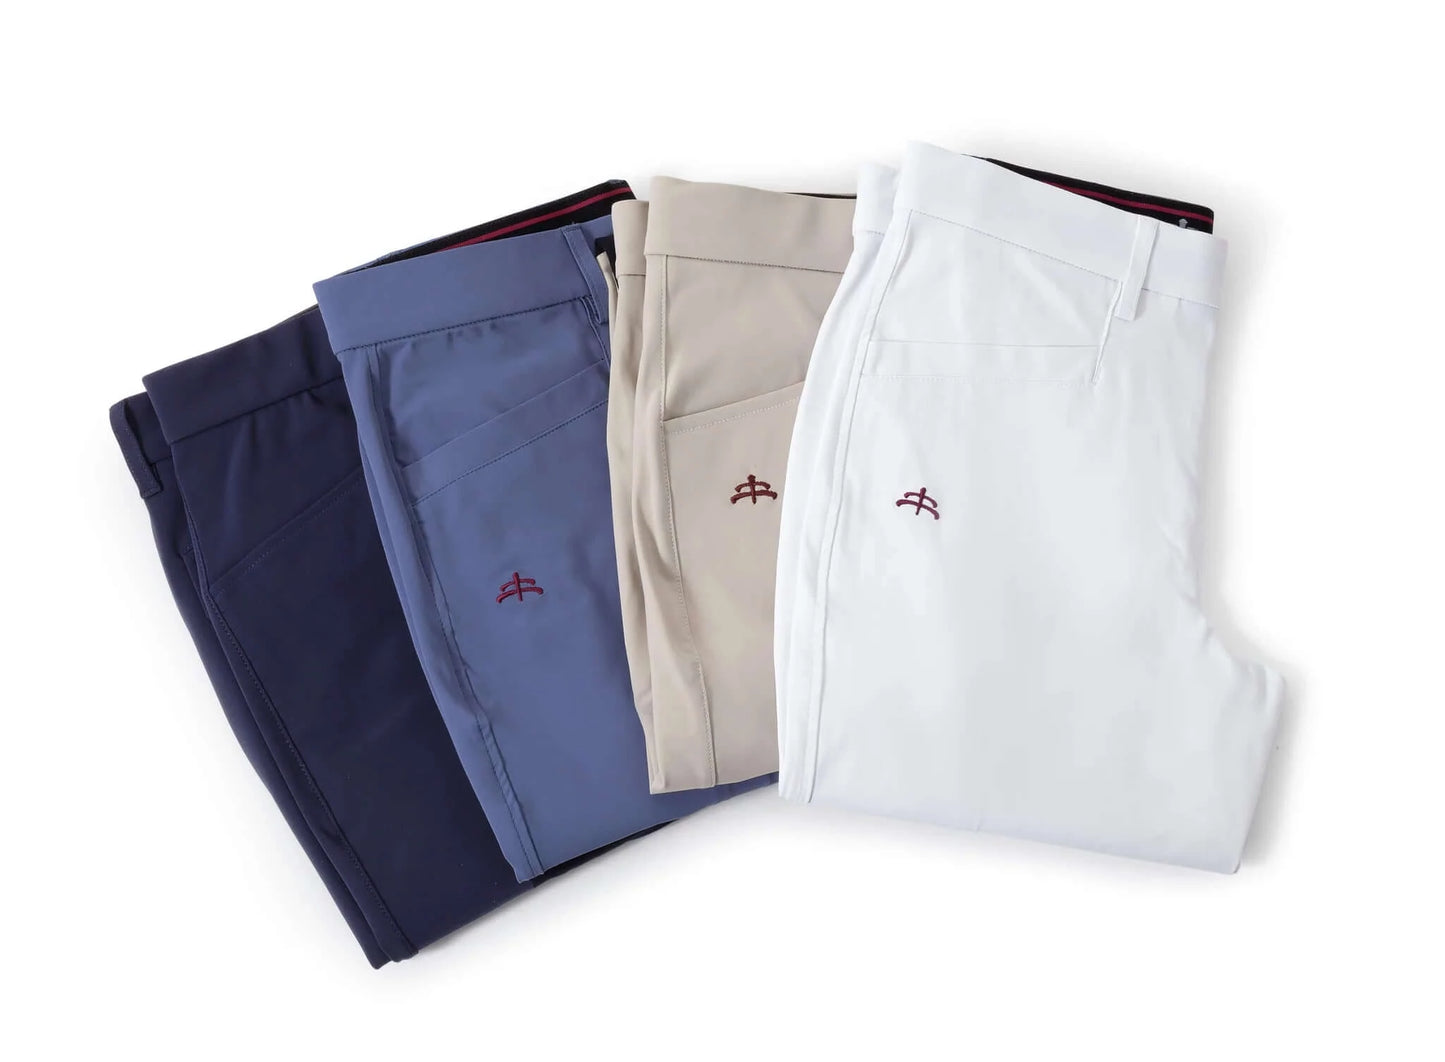 Men breeches with gel grip mod. LORD